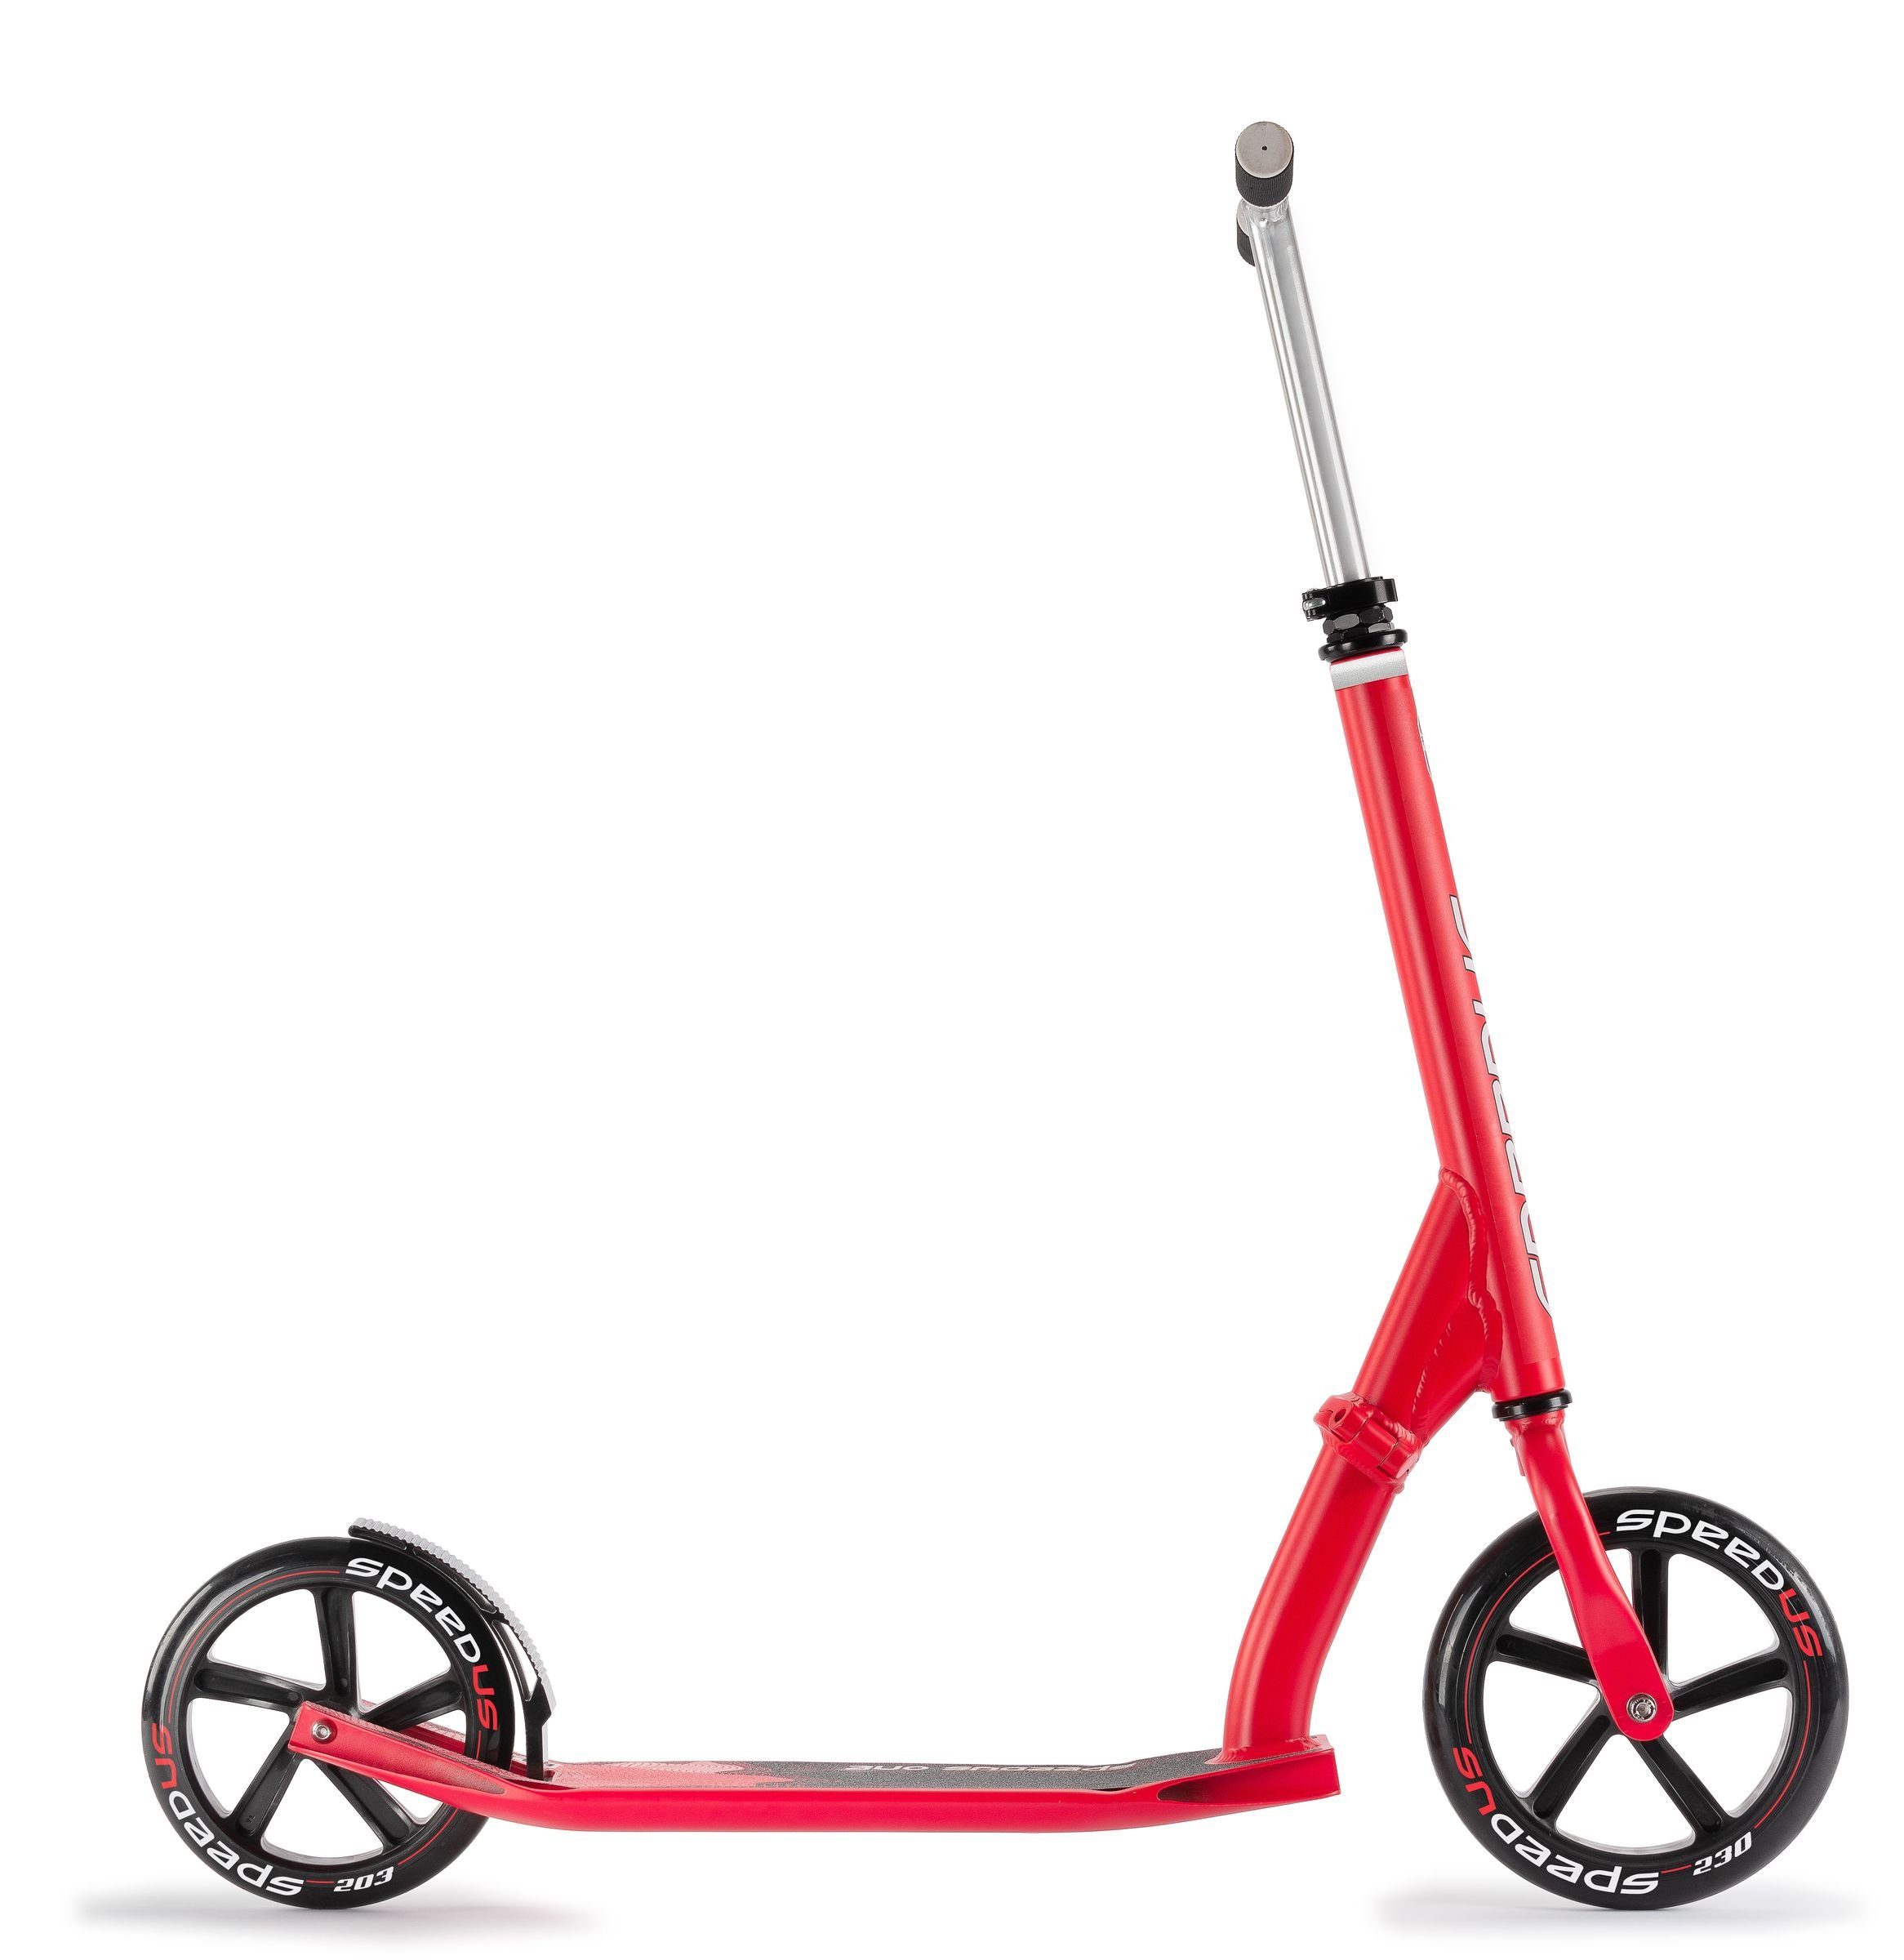 Puky Scooter Puky ONE SpeedUs klappbar Alu-Scooter rot